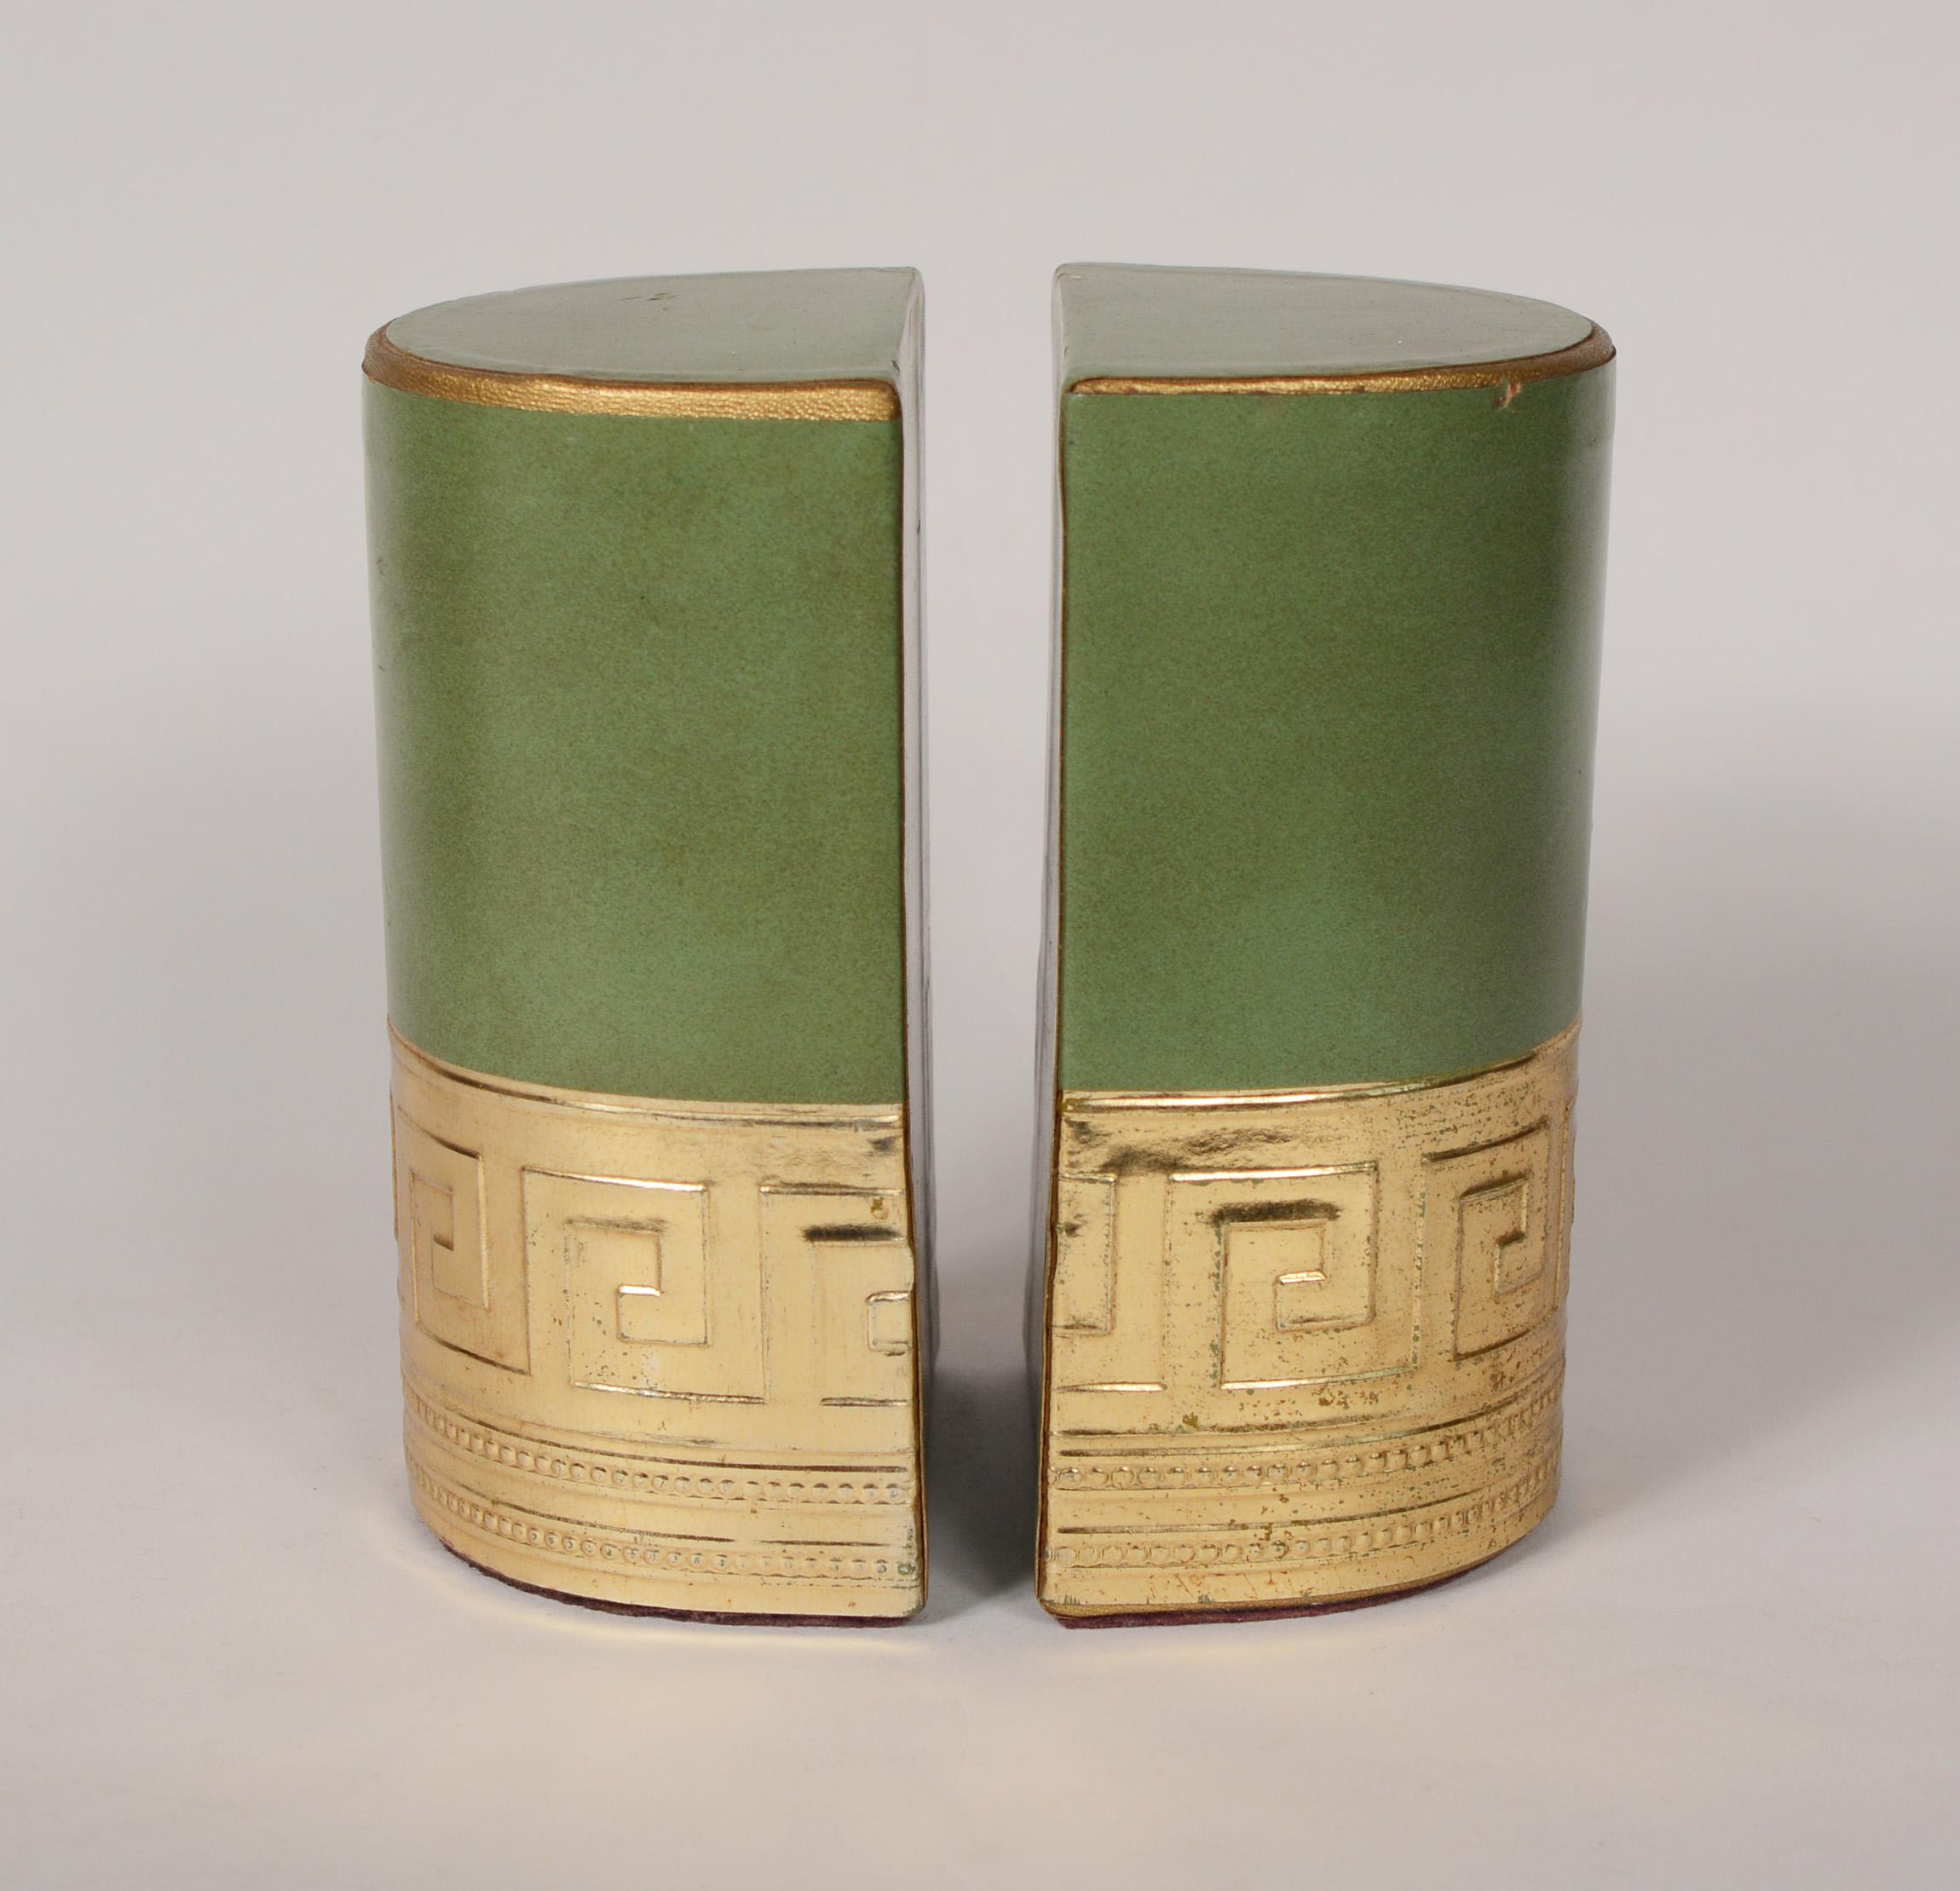 Pair of leather covered bookends with a Greek key design in a brass colored foil paper. These are likely Italian. There is a loss in the foil paper at the center front of both and a small ding on the top edge of one. There is discoloration to the